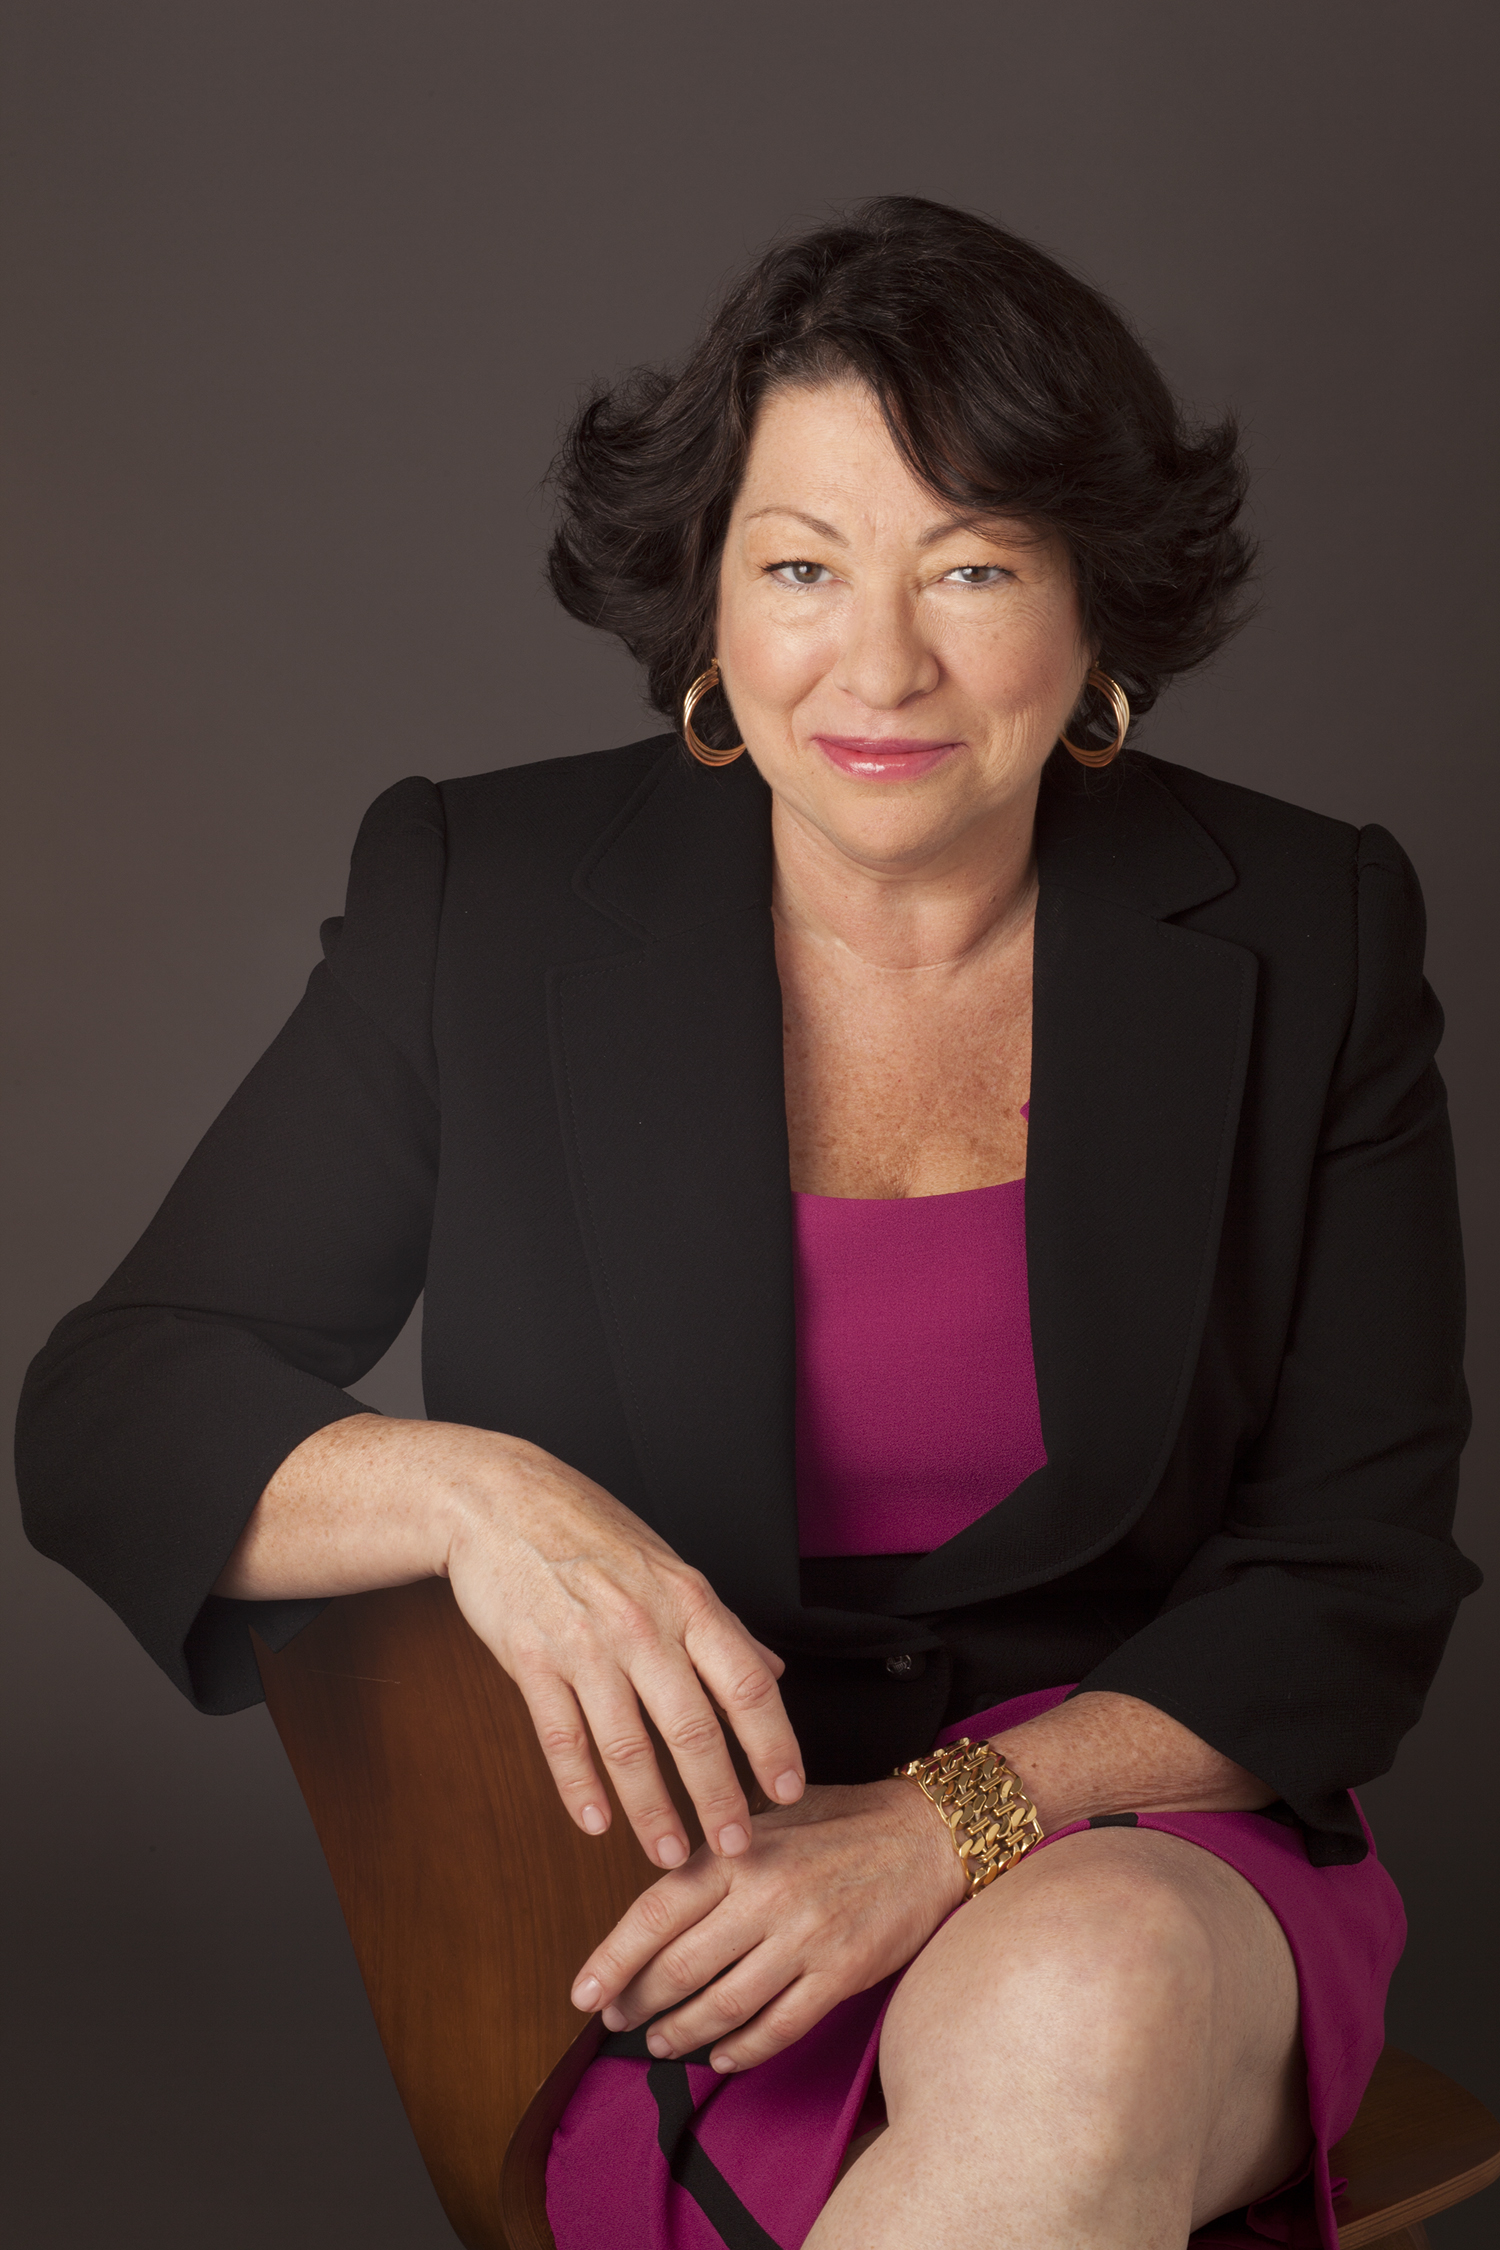 U.S. Supreme Court Justice Sonia Sotomayor will speak at the University of Utah Jan. 28 at noon in the Huntsman Center. Her appearance highlights the MUSE Project's theme year on justice, for which Sotomayor’s book “My Beloved World” is the centerpiece text.